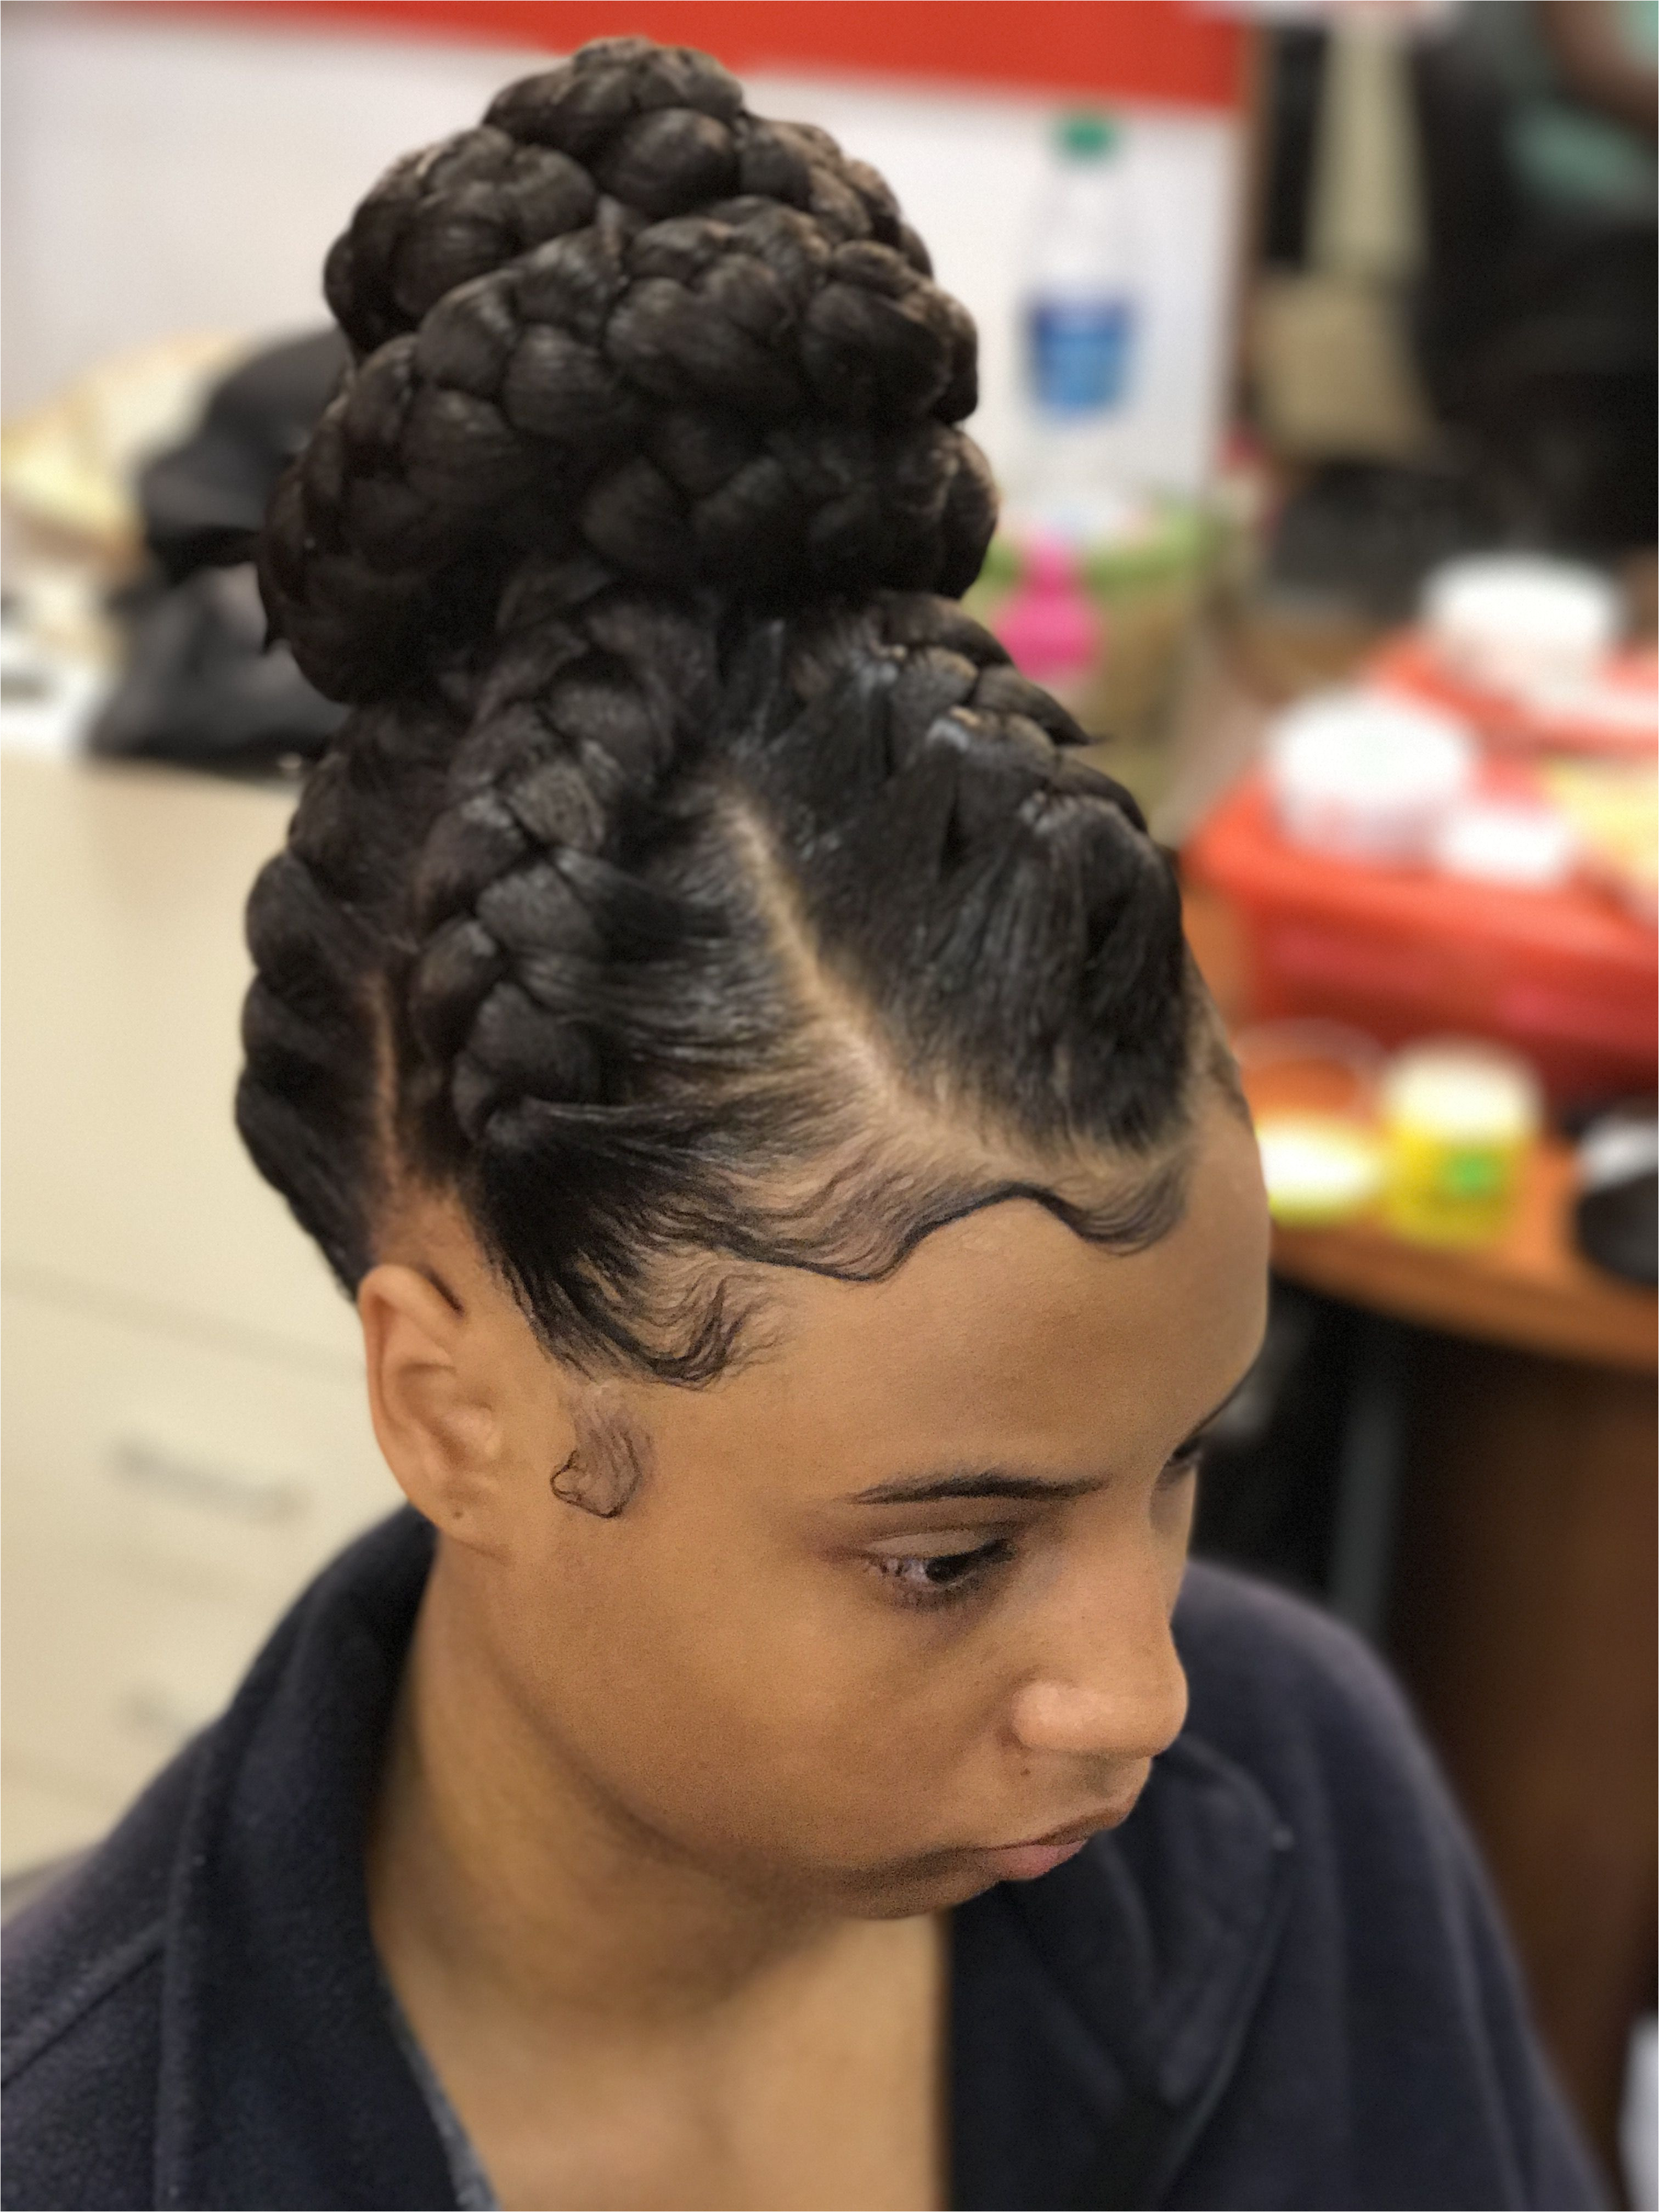 Hairstyles with Braids and Buns Goddess Braid Bun Bun Updo Braidedhairstyles Braidsandtwists